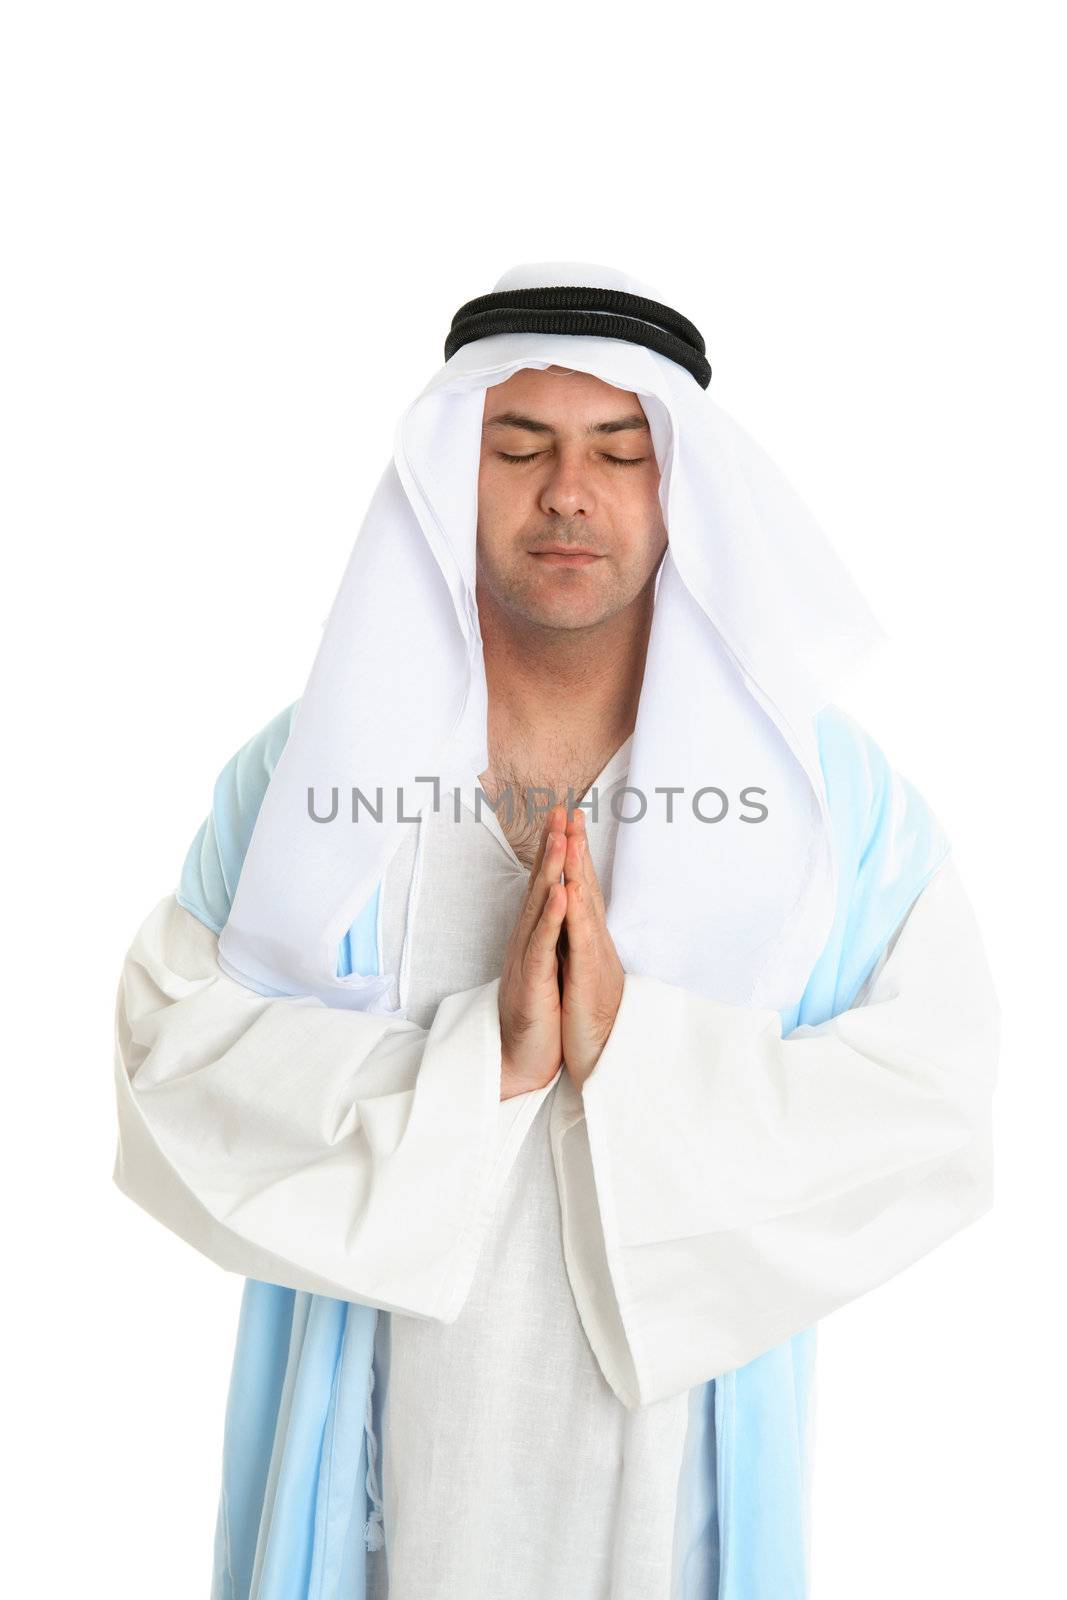 Biblical or middle eastern man in silent prayer